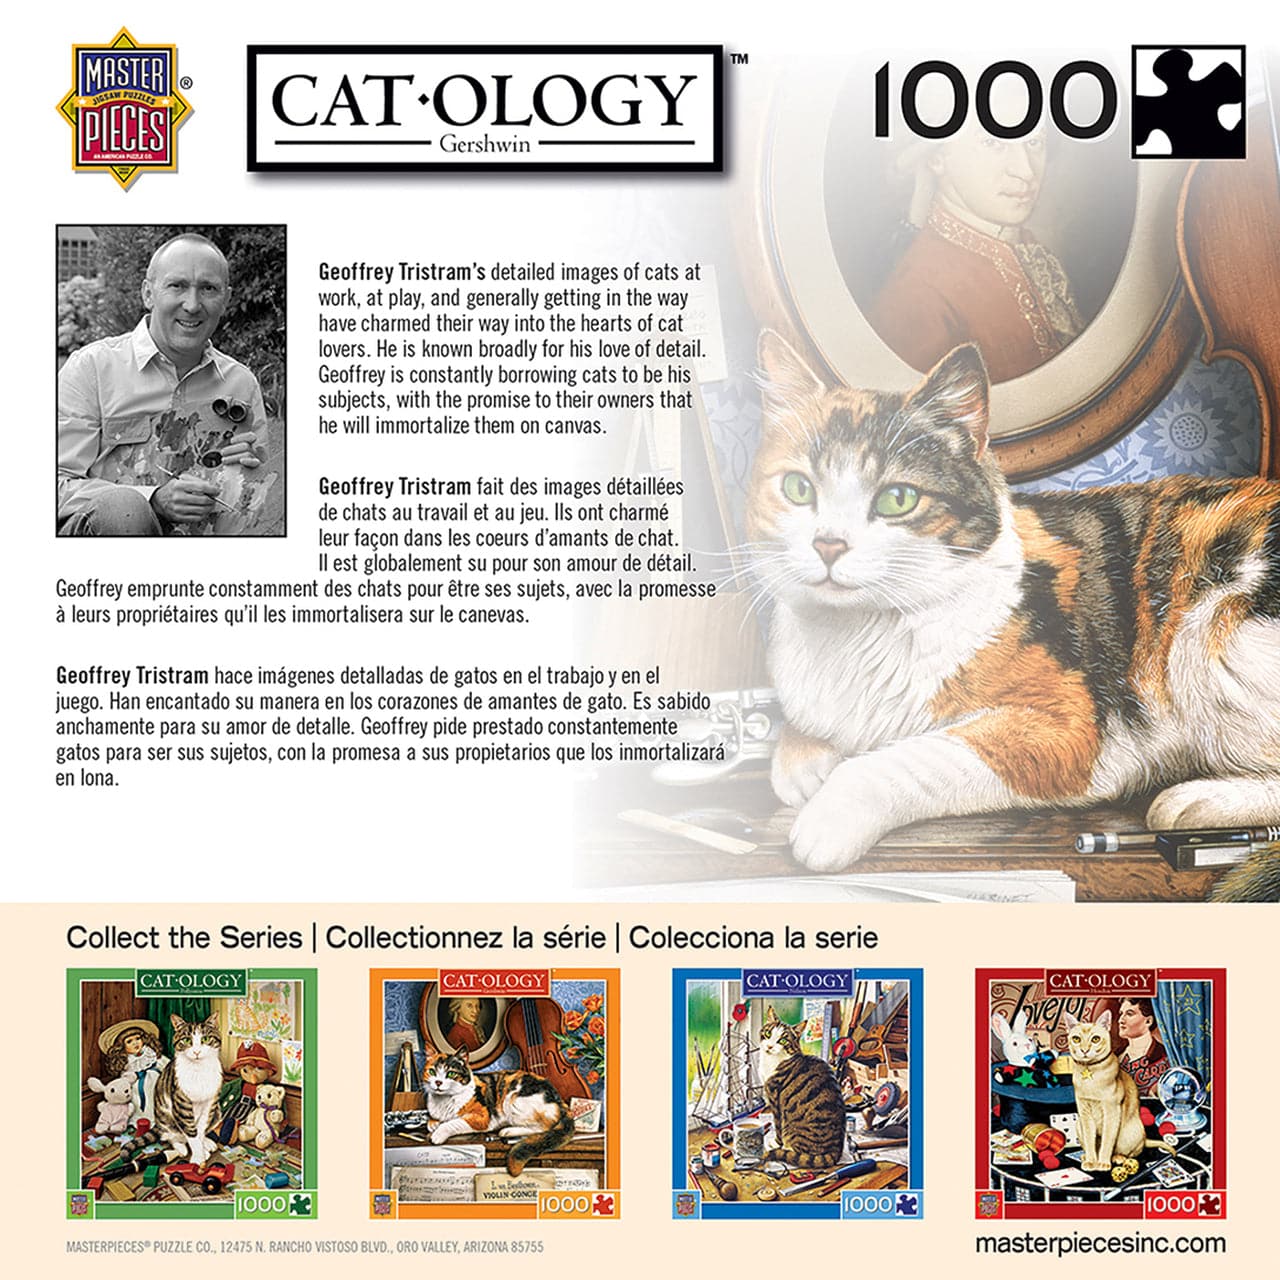 MasterPieces-Catology - Gershwin - 1000 Piece Puzzle-71761-Legacy Toys